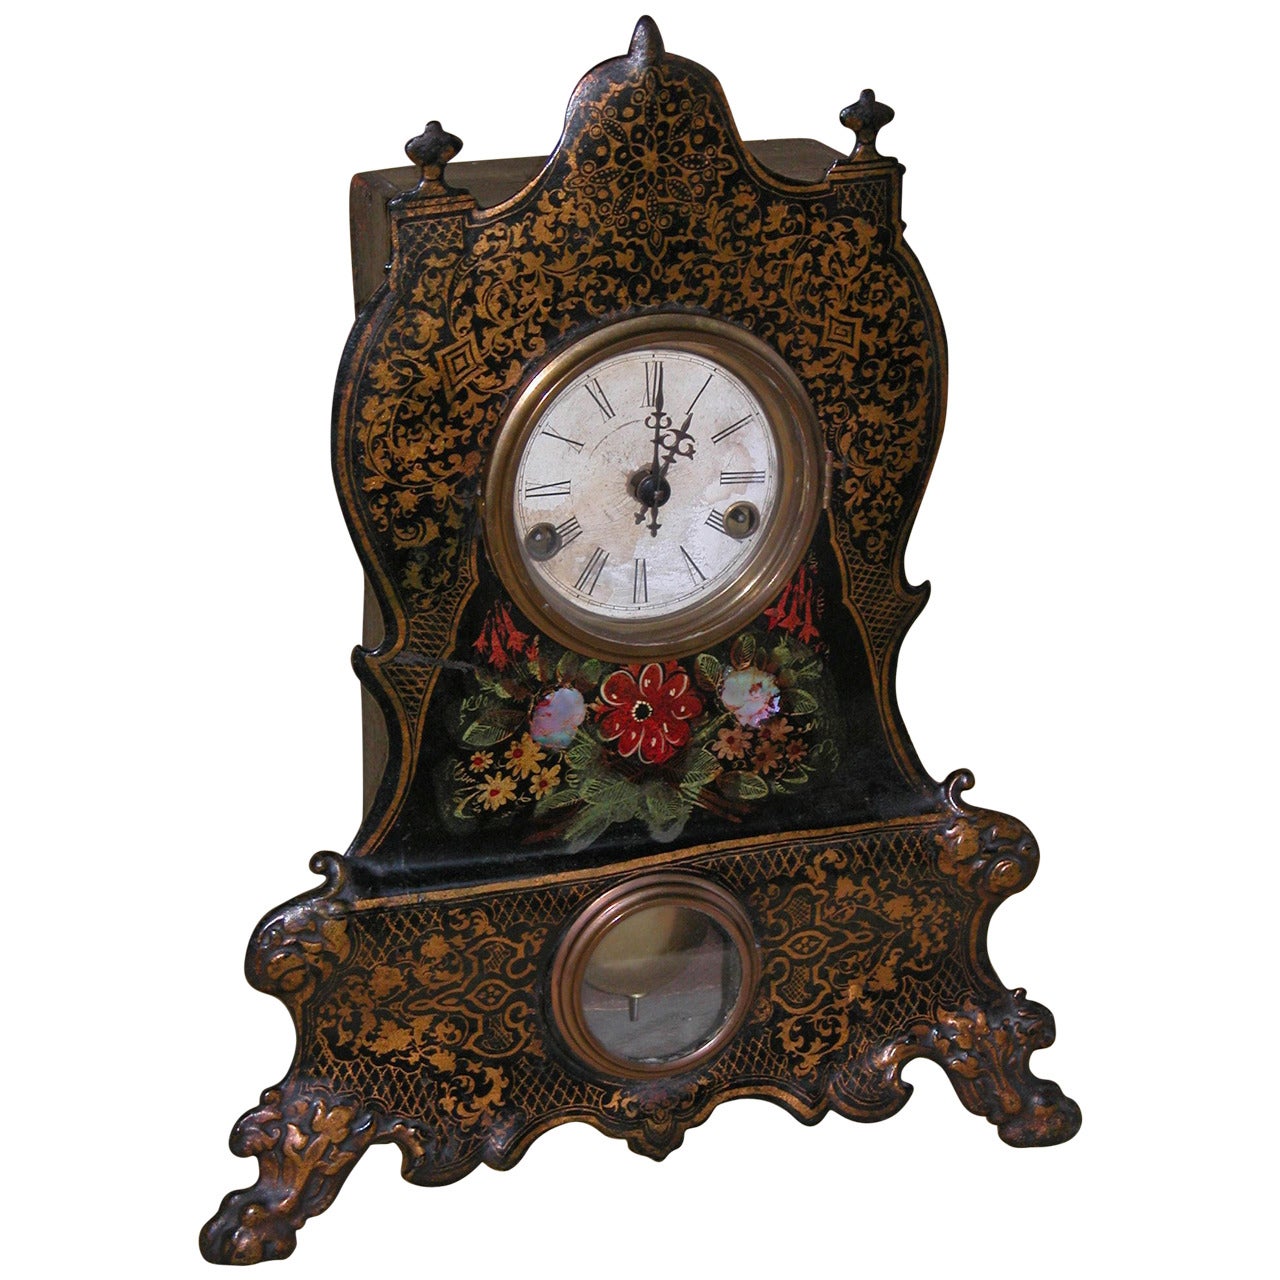 Victorian Clock with Cast Iron Face, Mother-of-Pearl Inlay and Floral Decoration